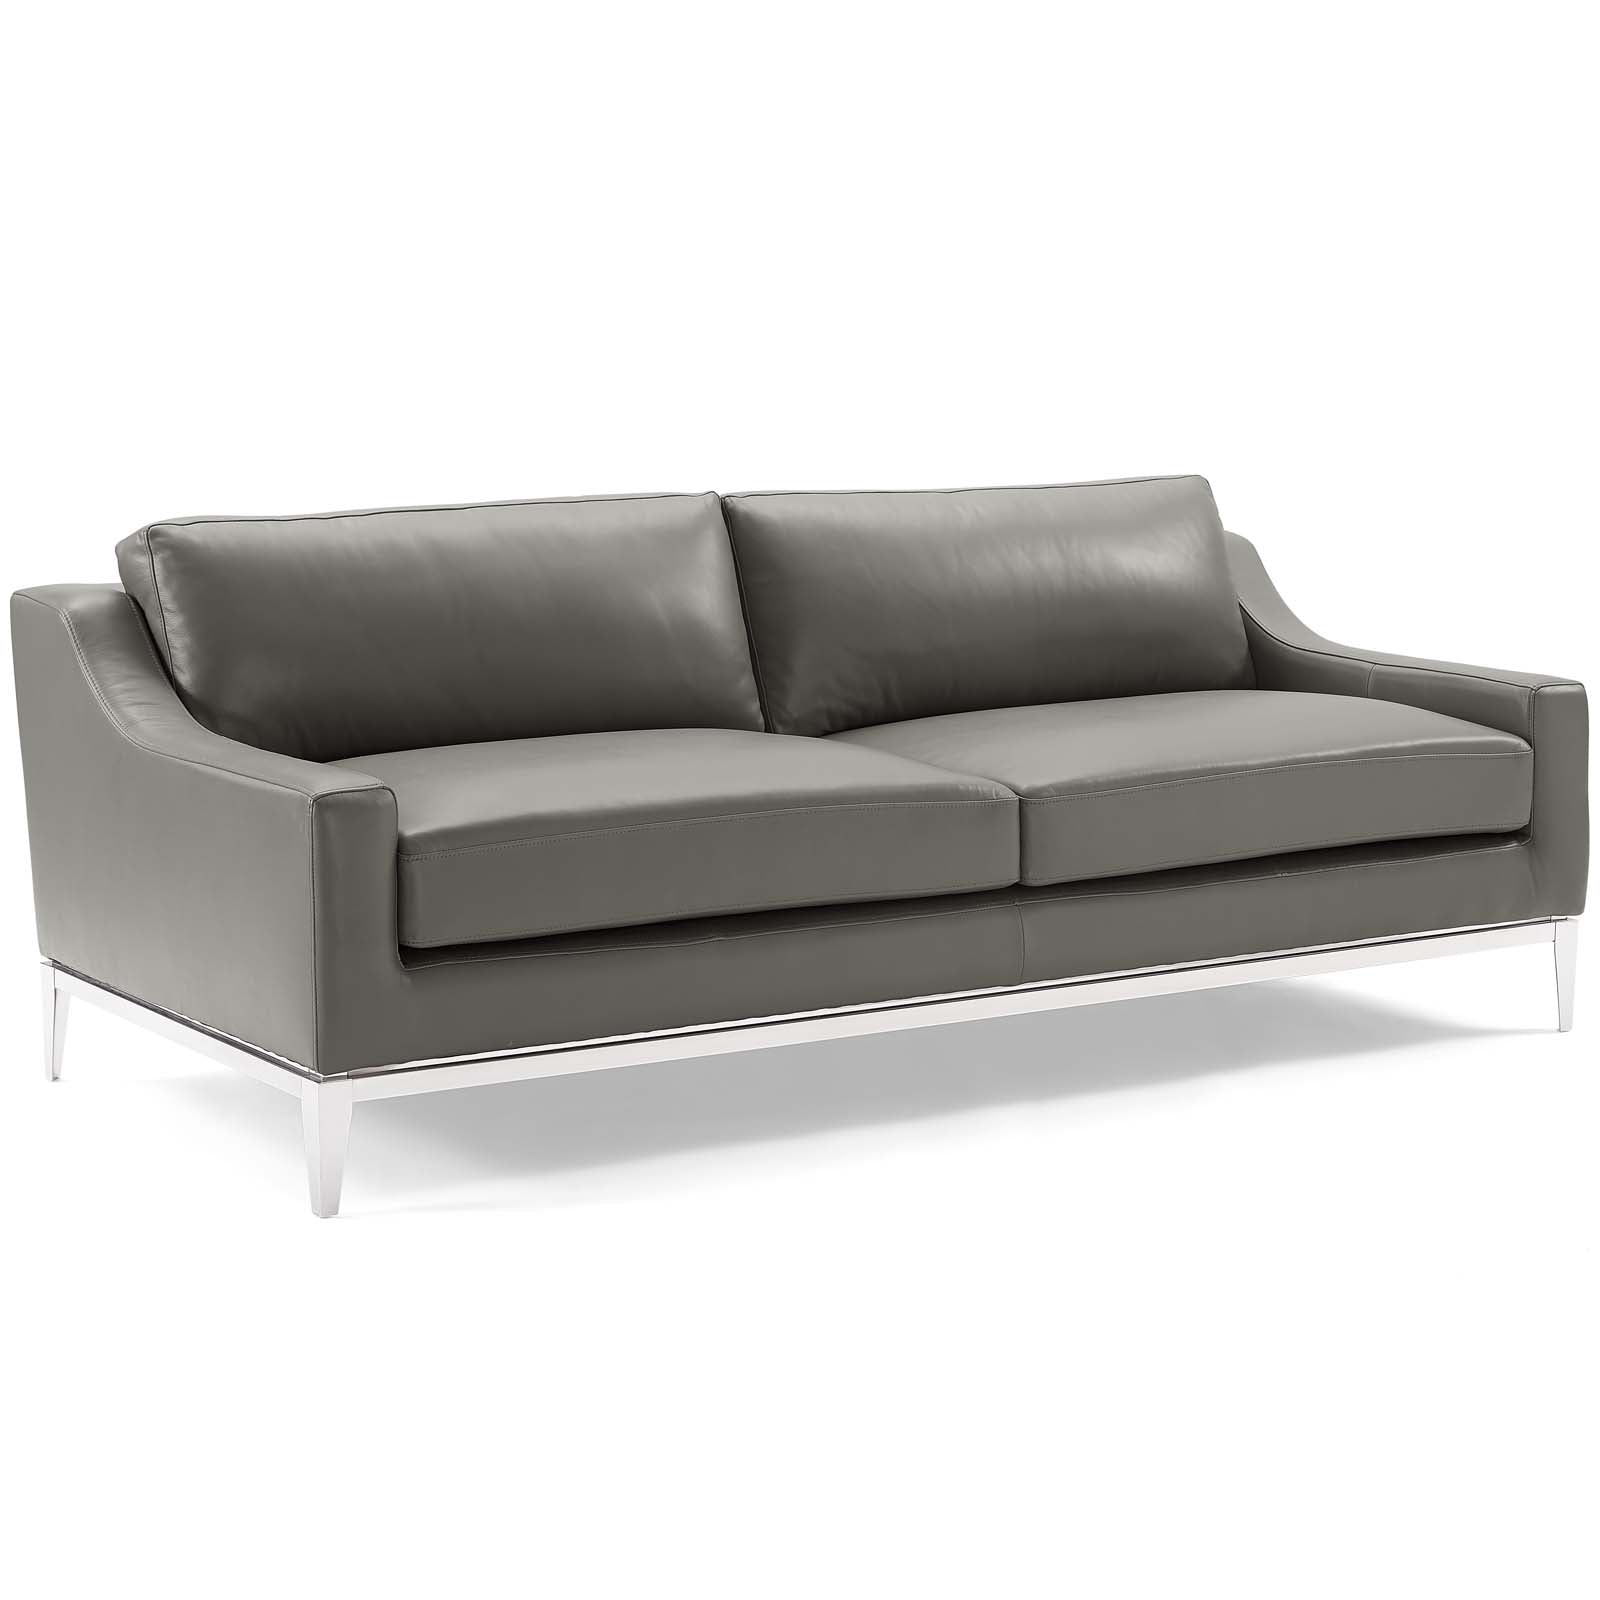 Modway Sofas & Couches - Harness 83.5" Sofa Gray